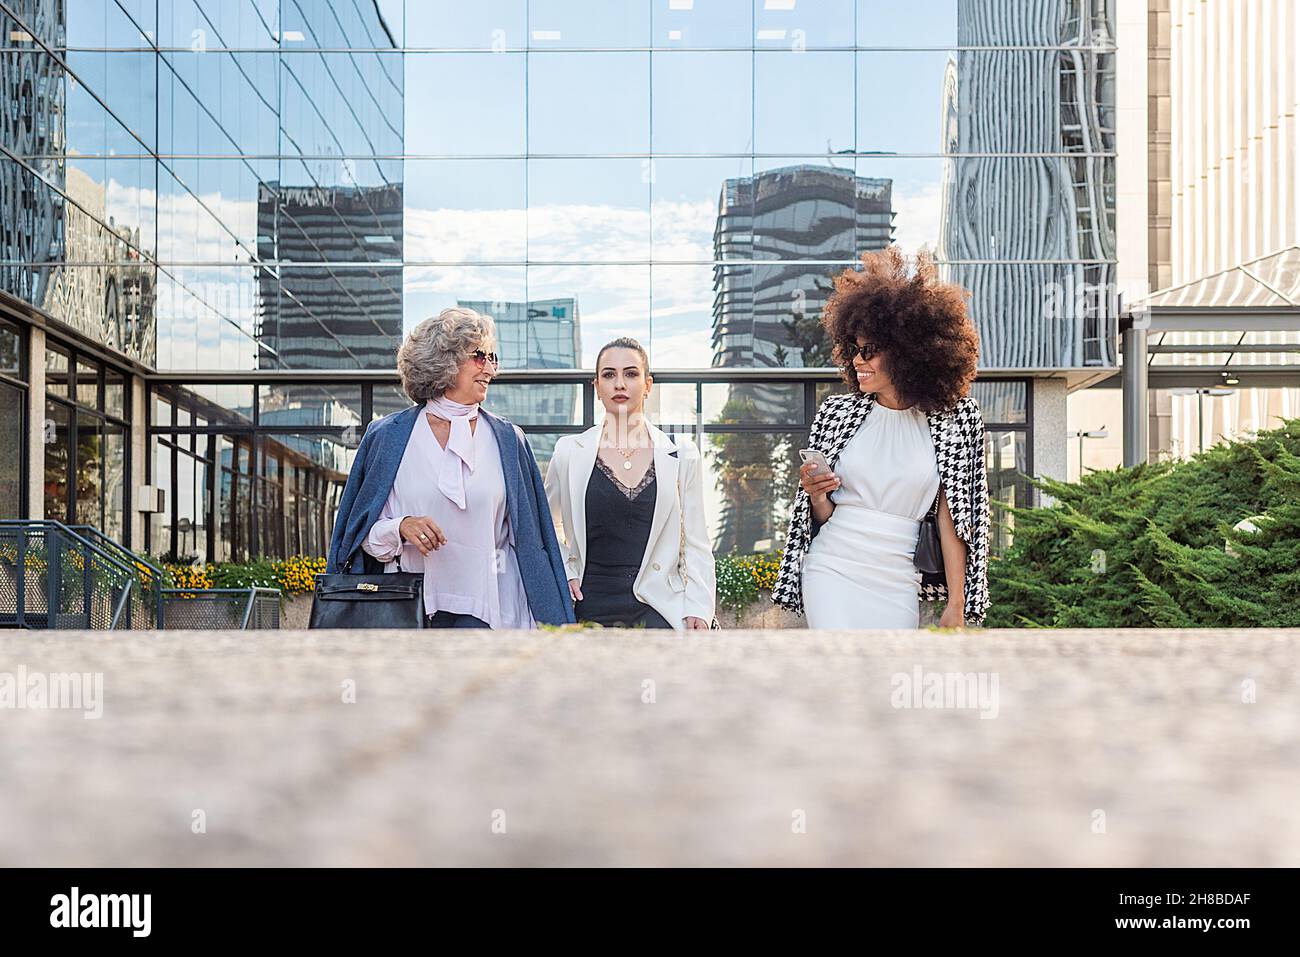 three business women leaving work talking to each other Stock Photo